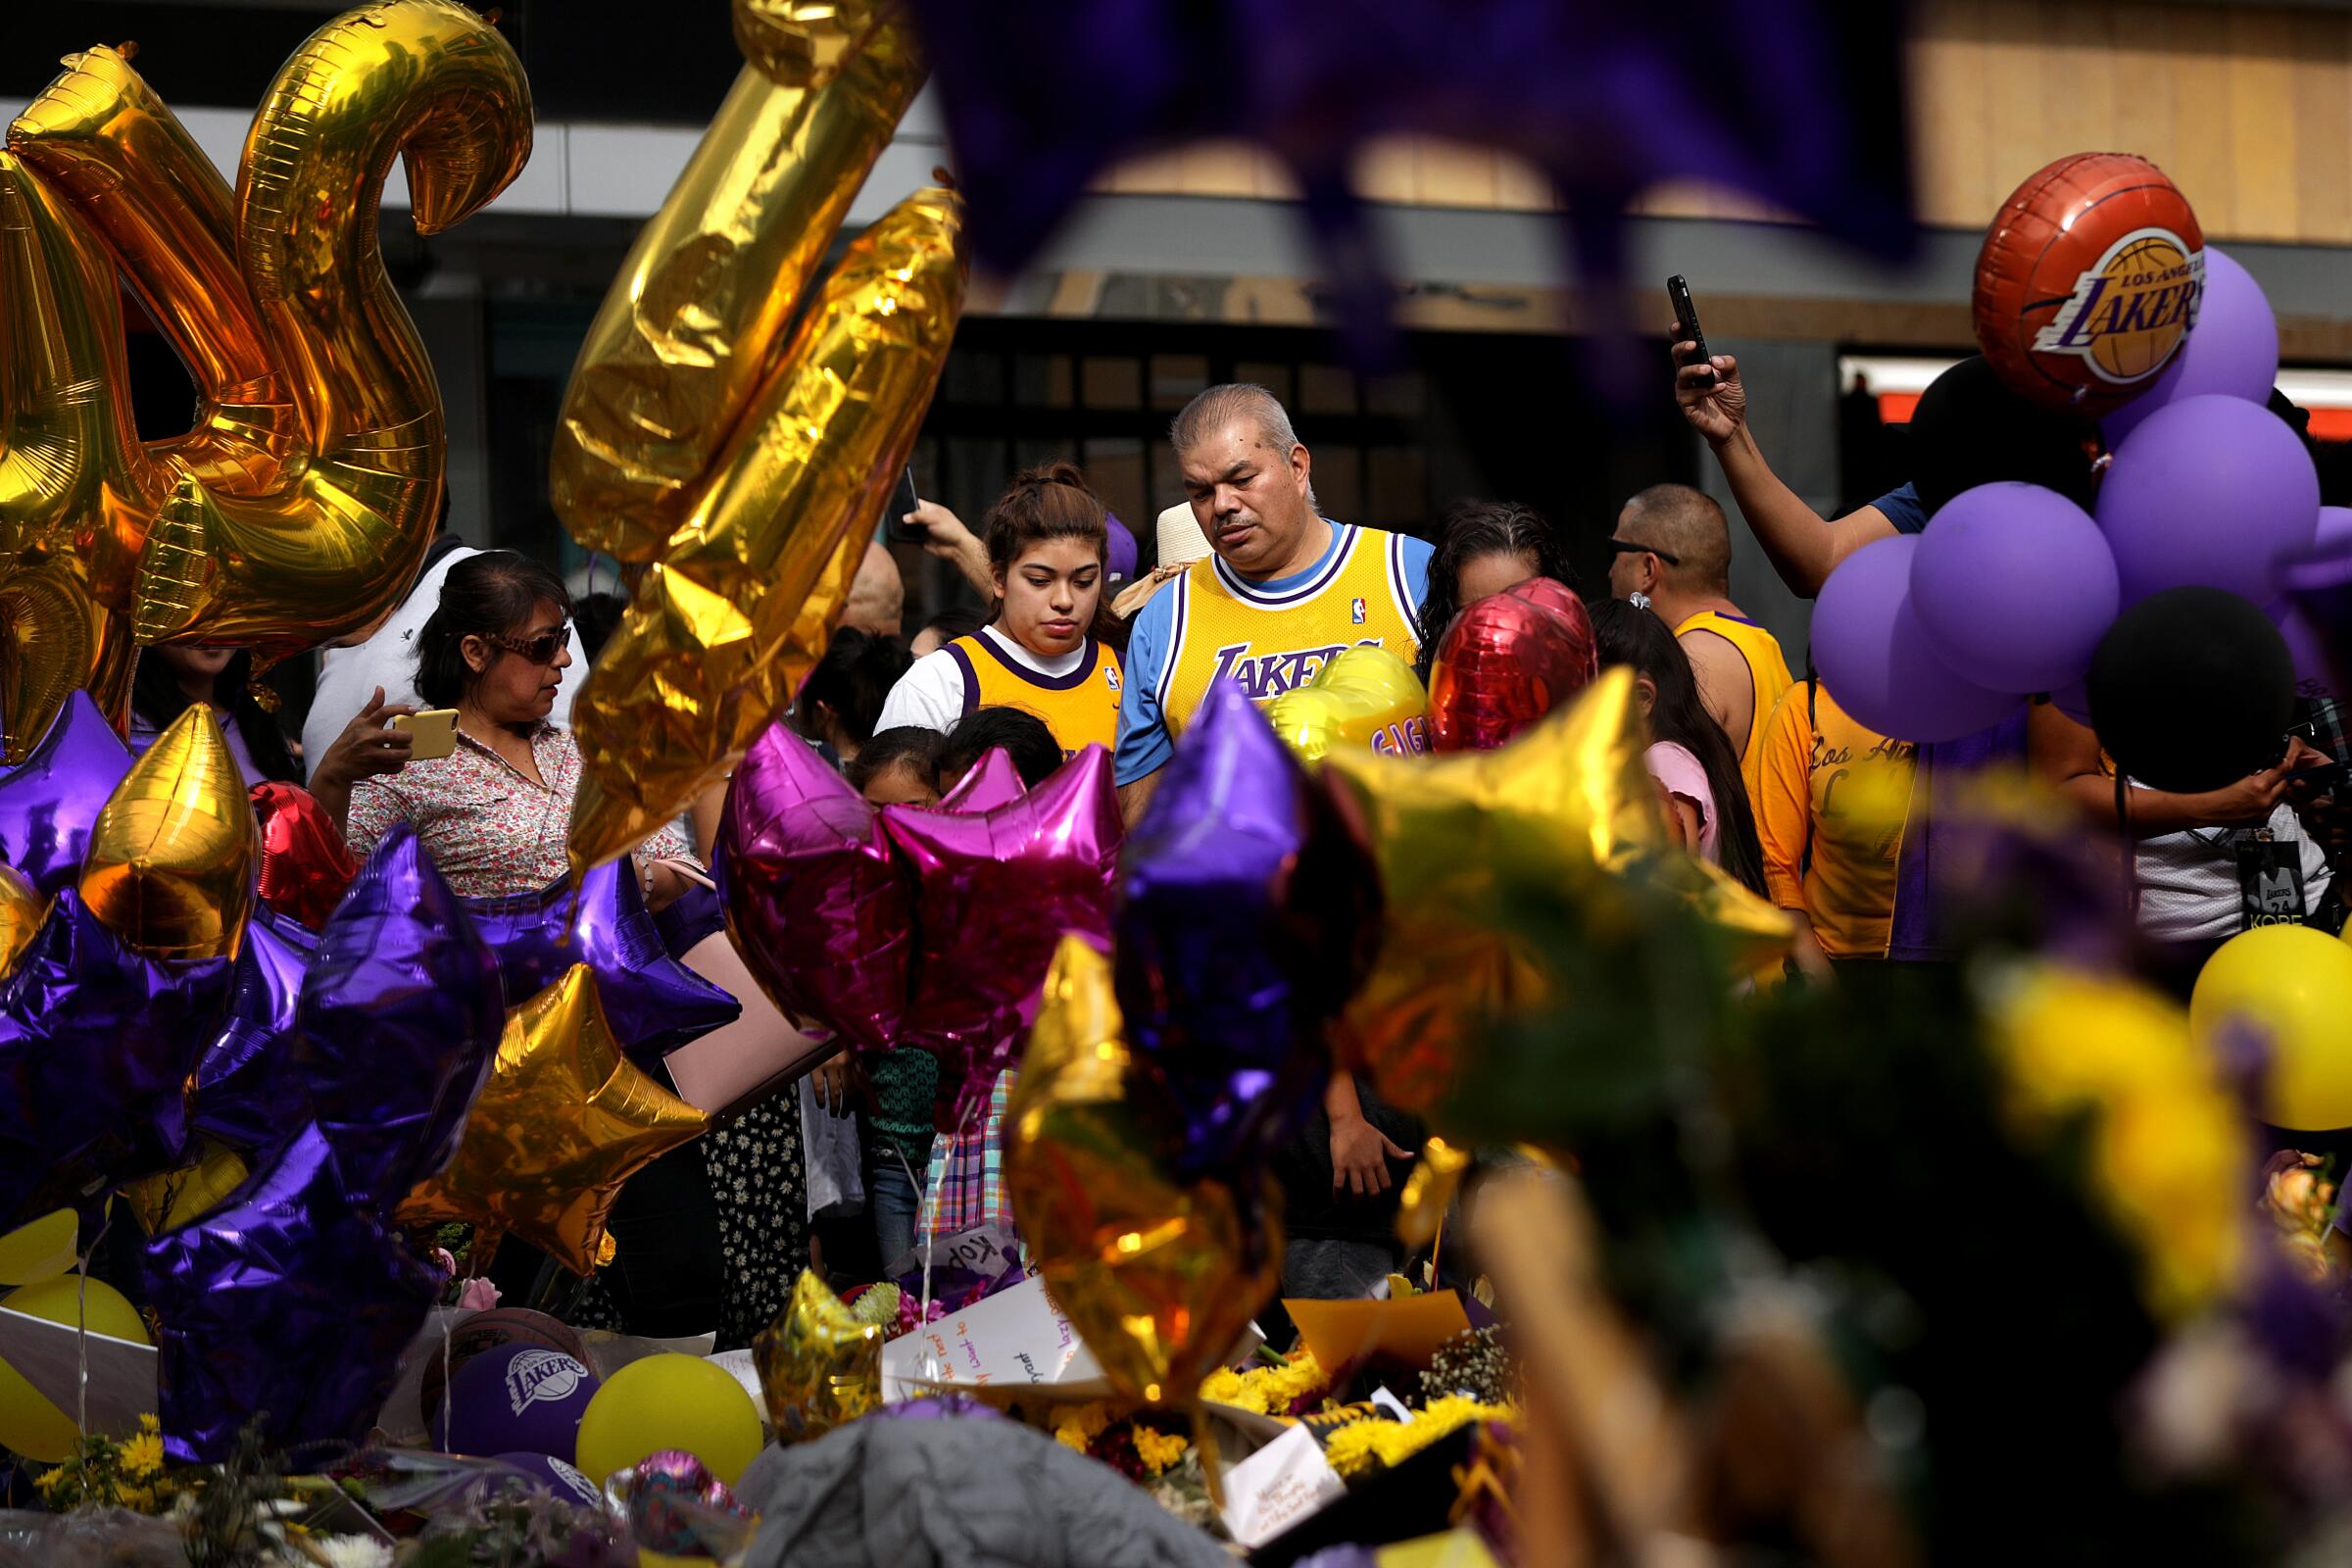 LOS ANGELES-CA-FEBRUARY 2, 2020: Fans gather at a memorial for Kobe Bryant at L.A. Live on Sunday, February 2, 2020. (Christina House / Los Angeles Times)